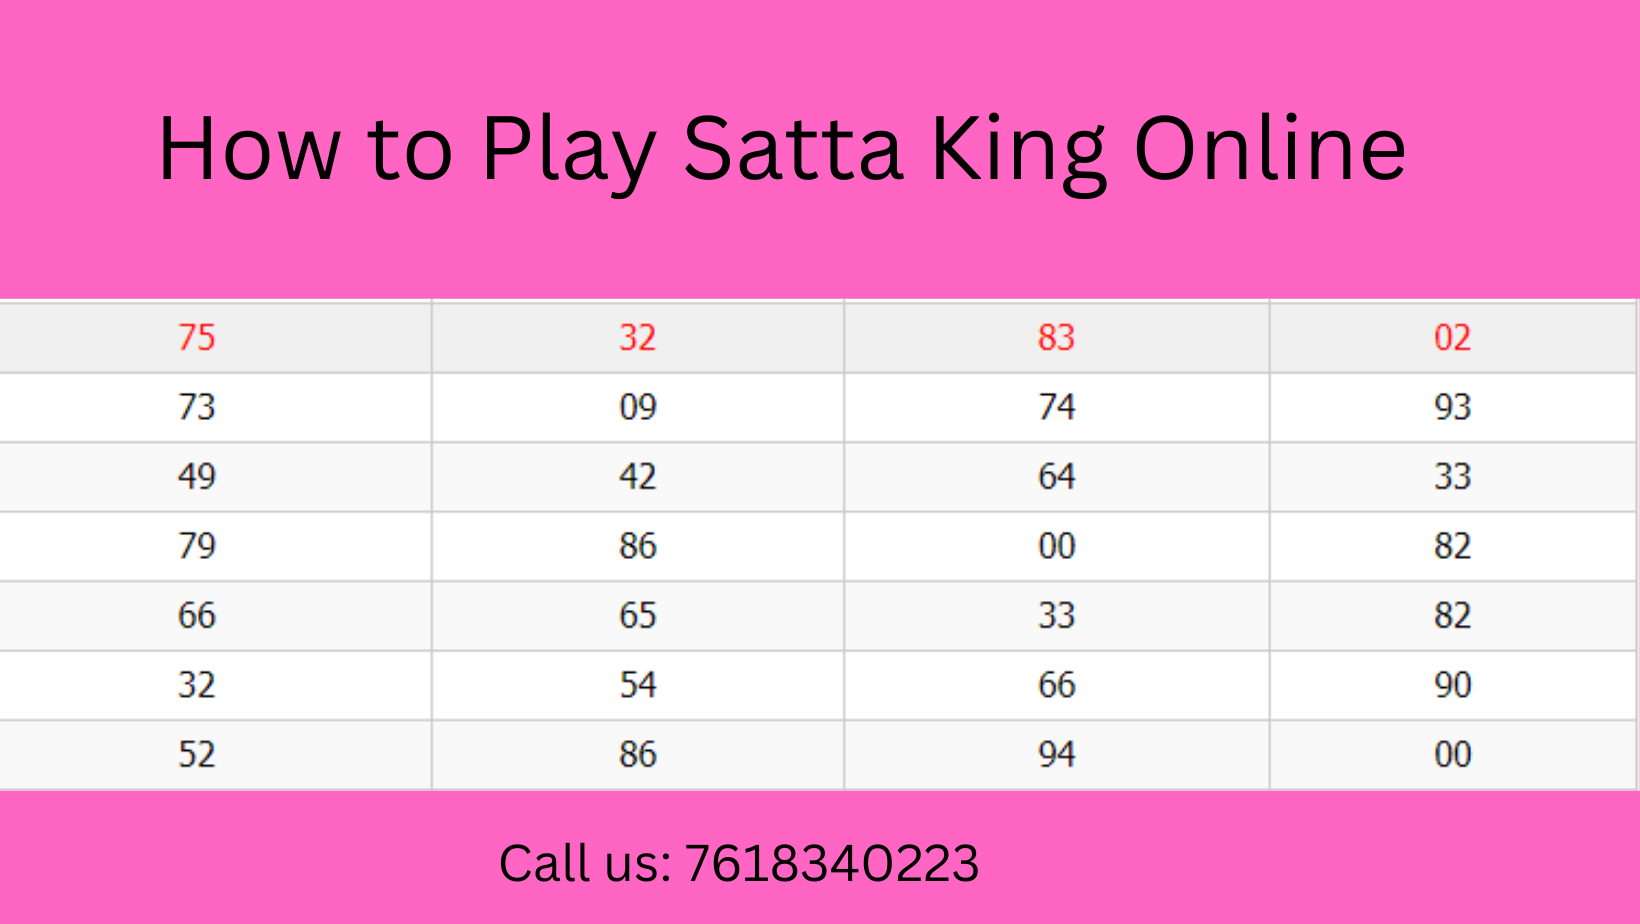 How to Play Satta King